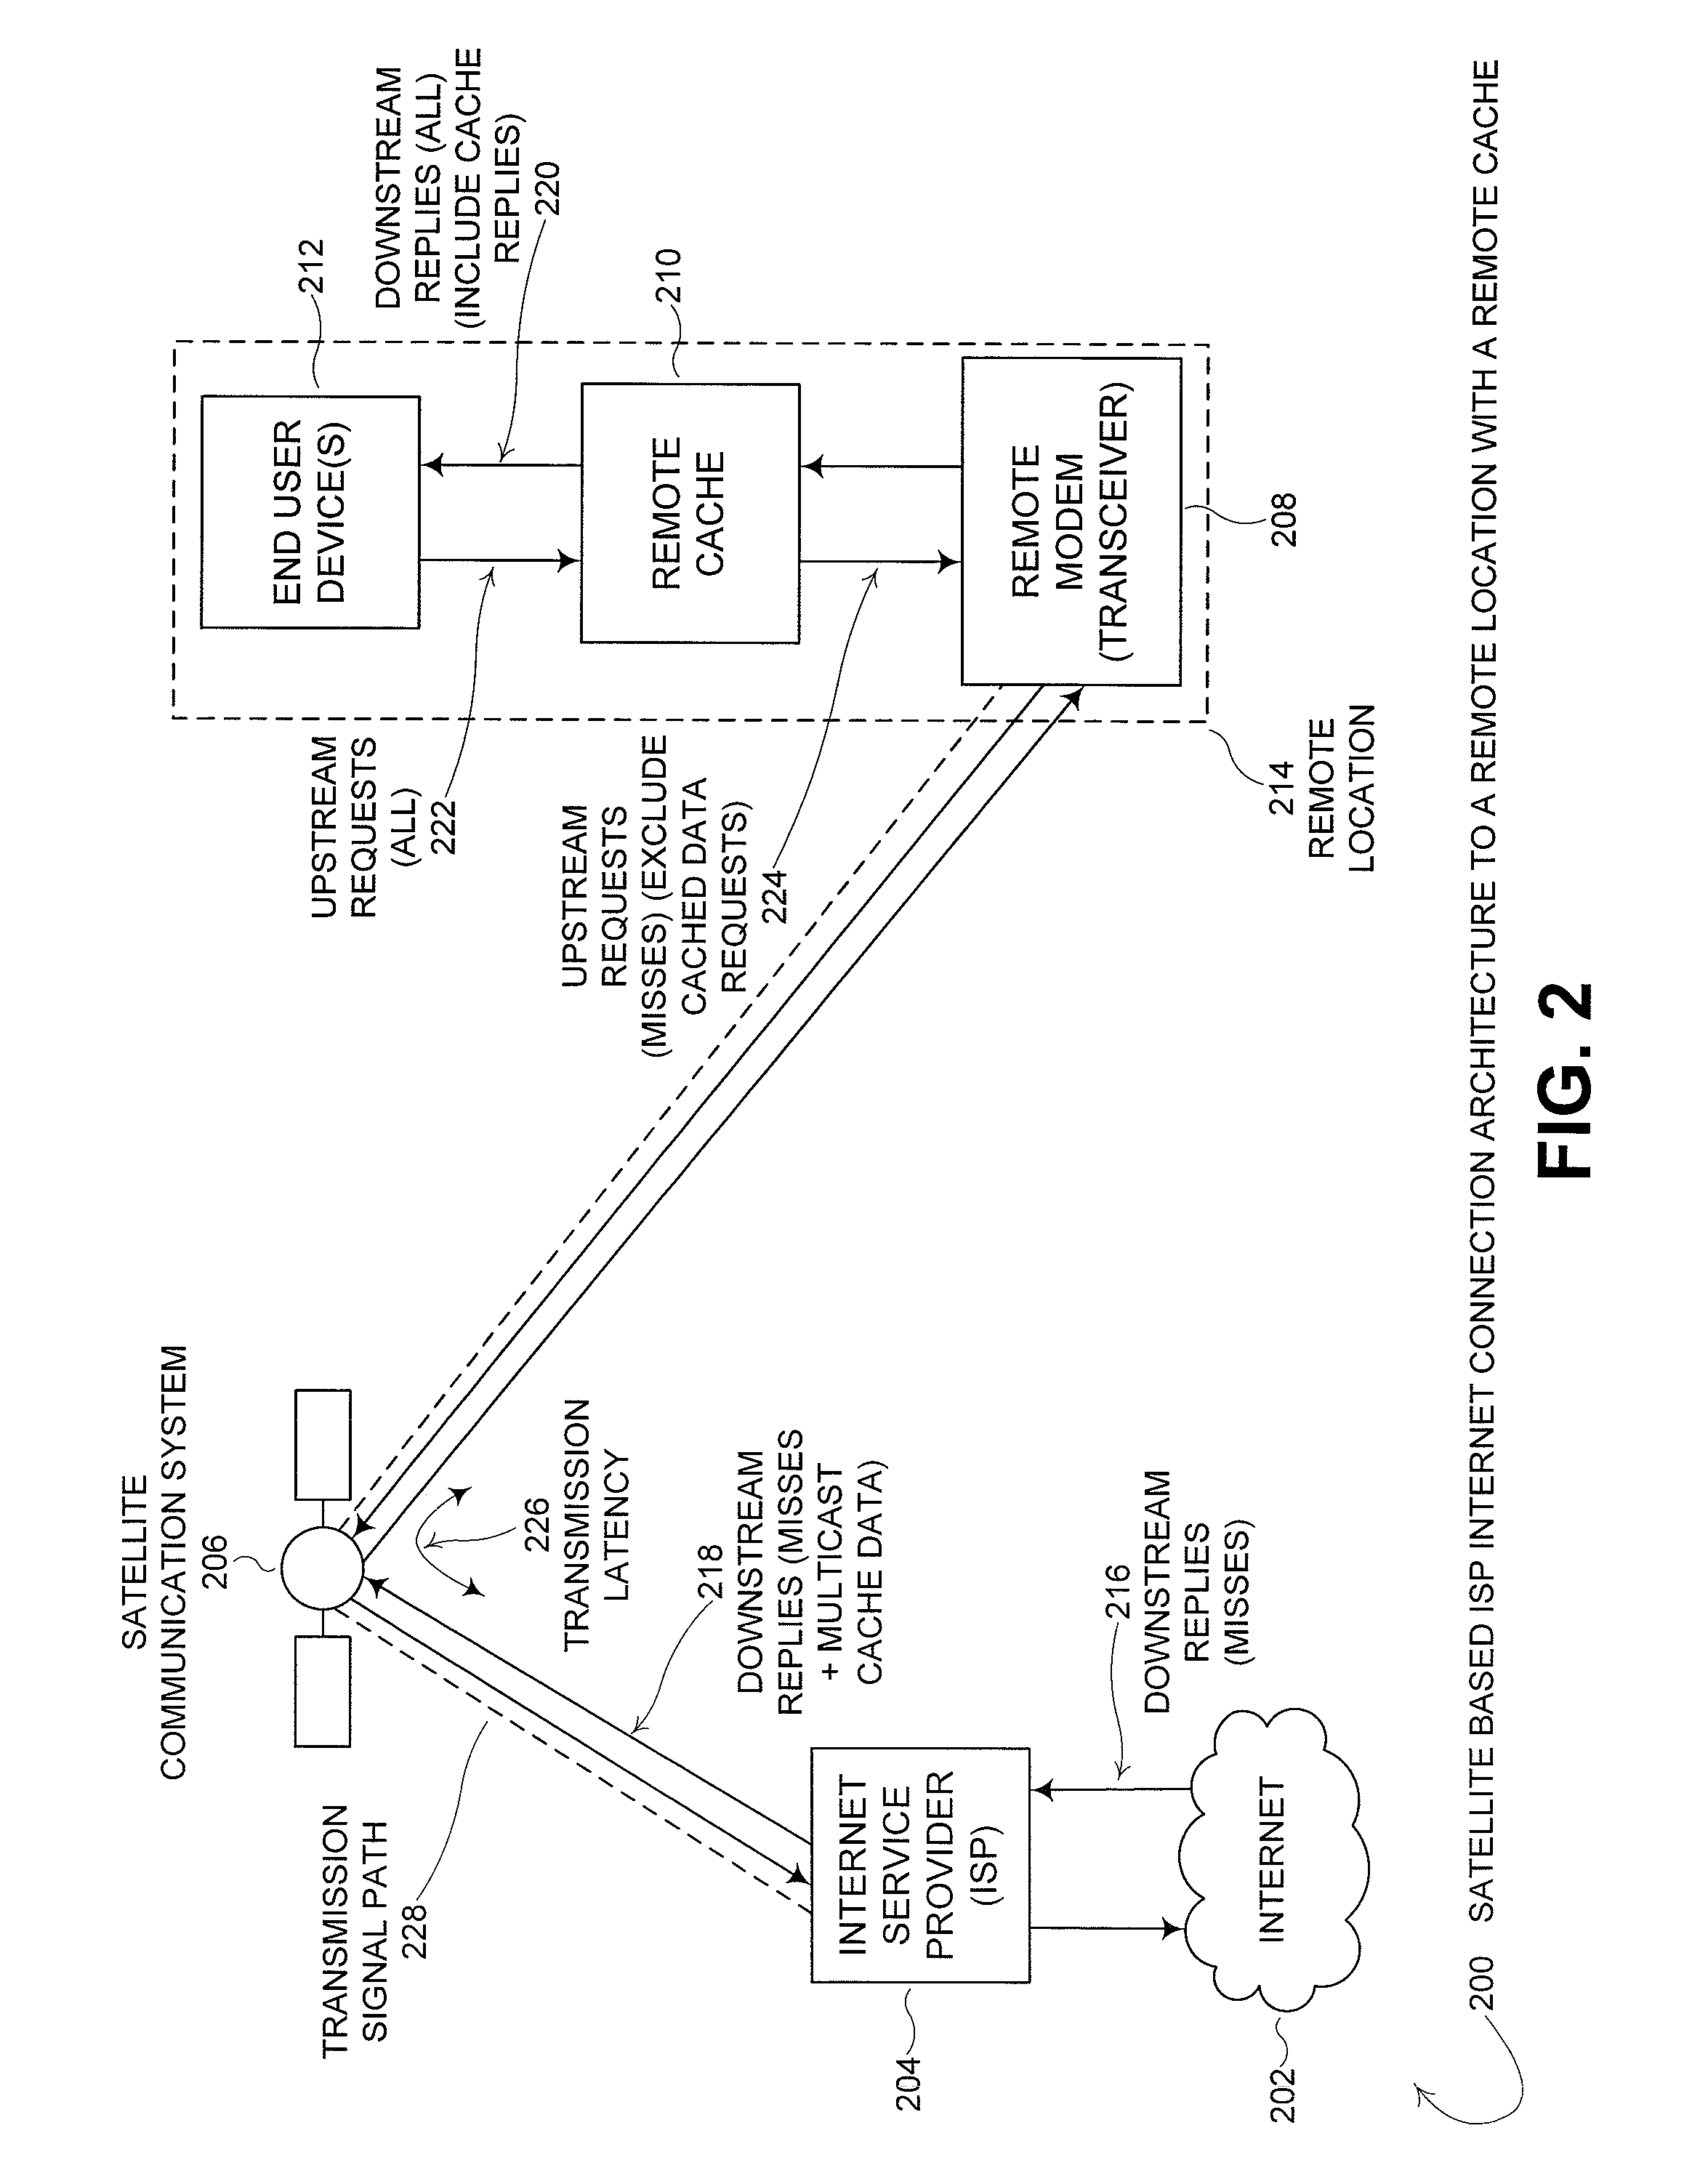 Distributed cache - adaptive multicast architecture for bandwidth reduction